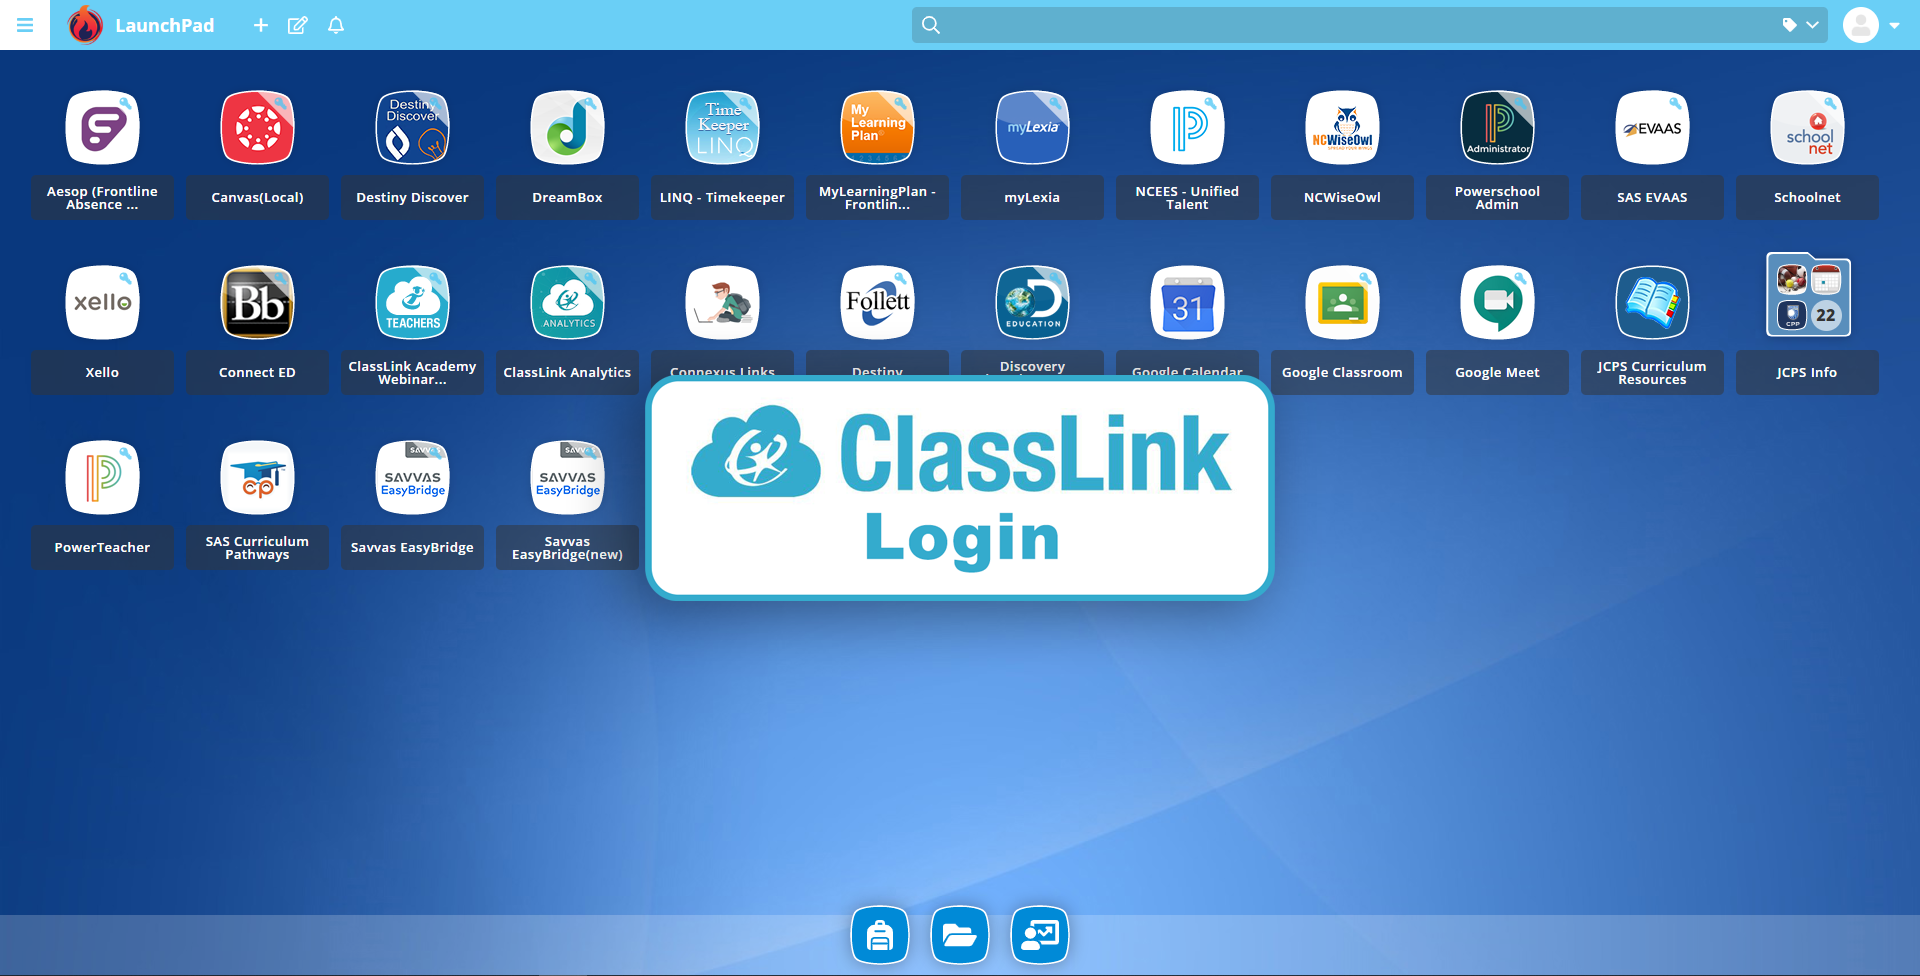 Classlink page with button